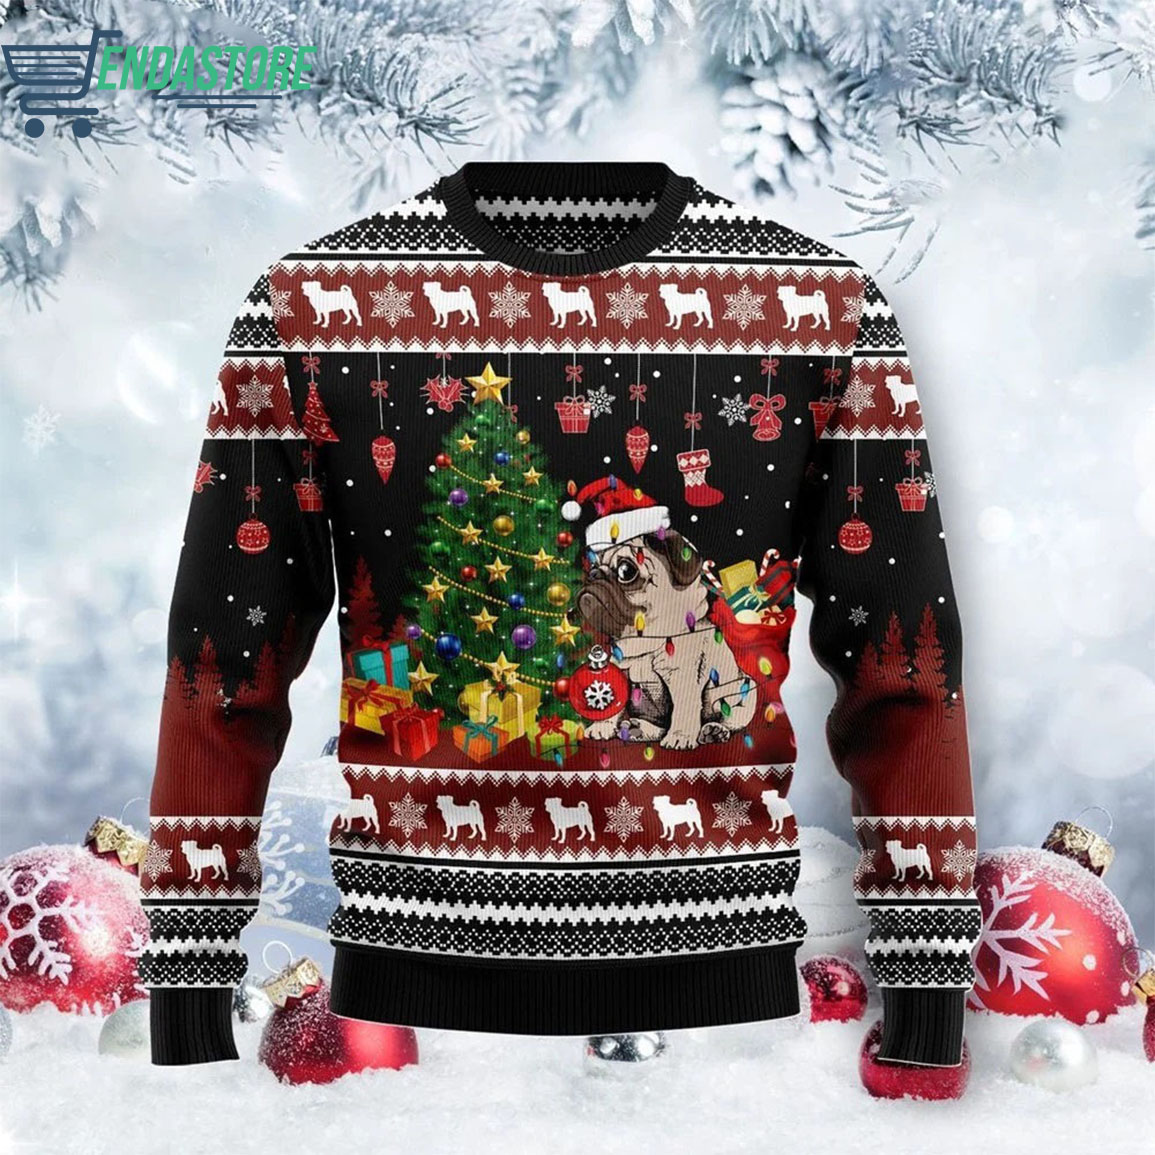 Endastore Los Angeles Dodgers Ugly Christmas Sweater